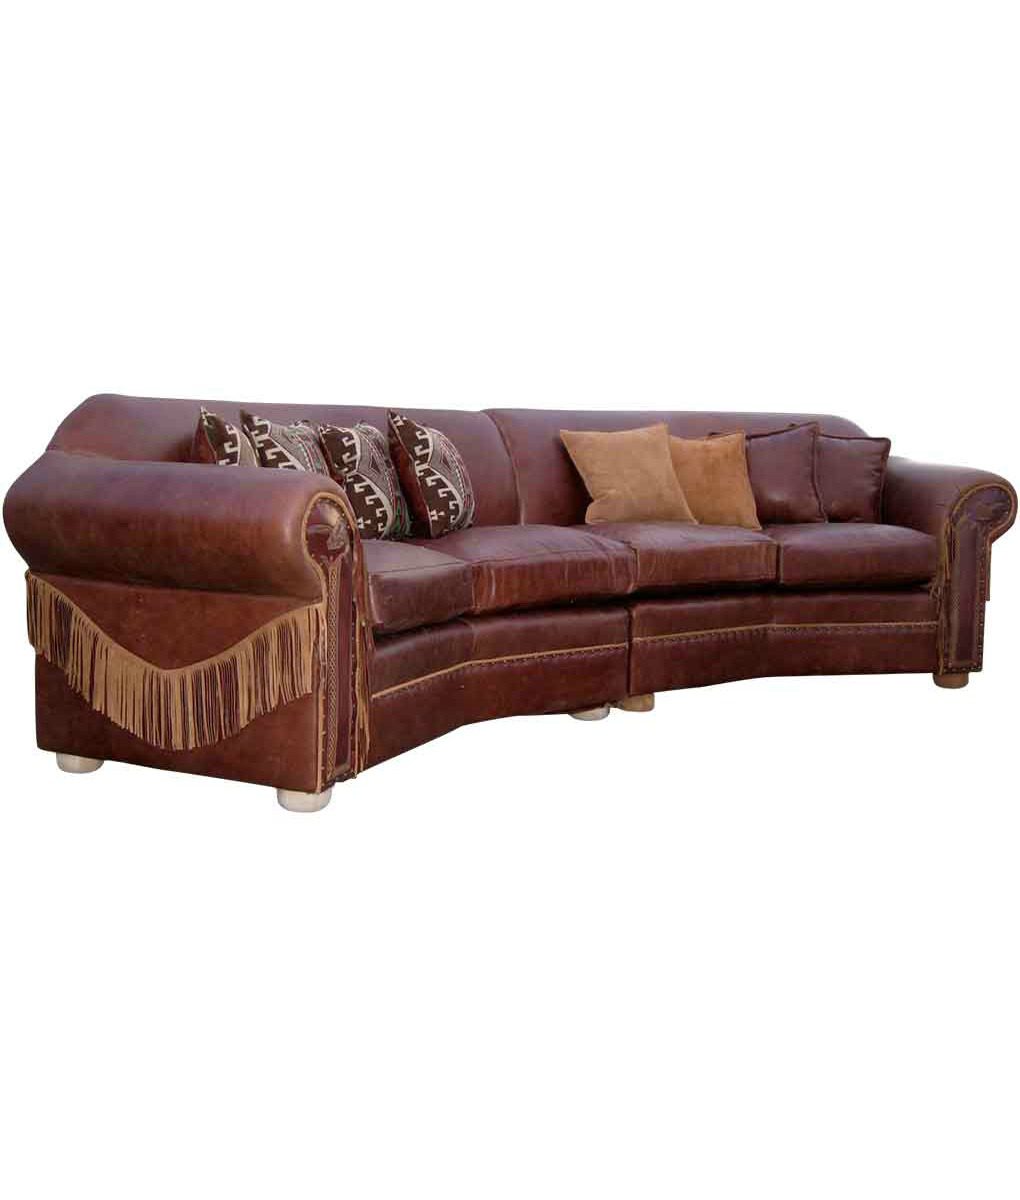 Curved Leather Sectional Sofa, Western Style Leather Couches